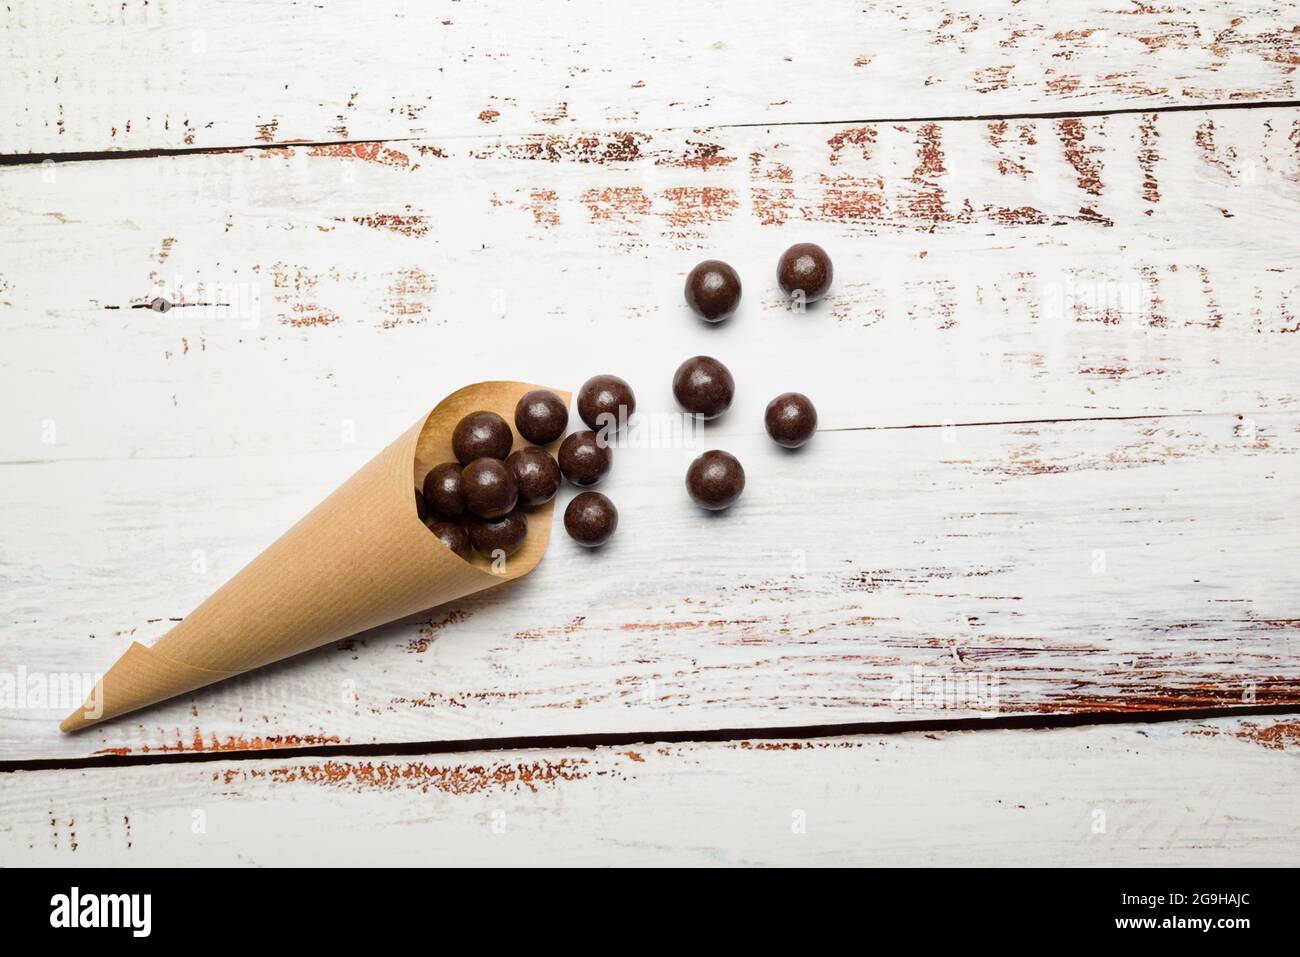 Chocolate pralines in paper cone on wooden table. Stock Photo